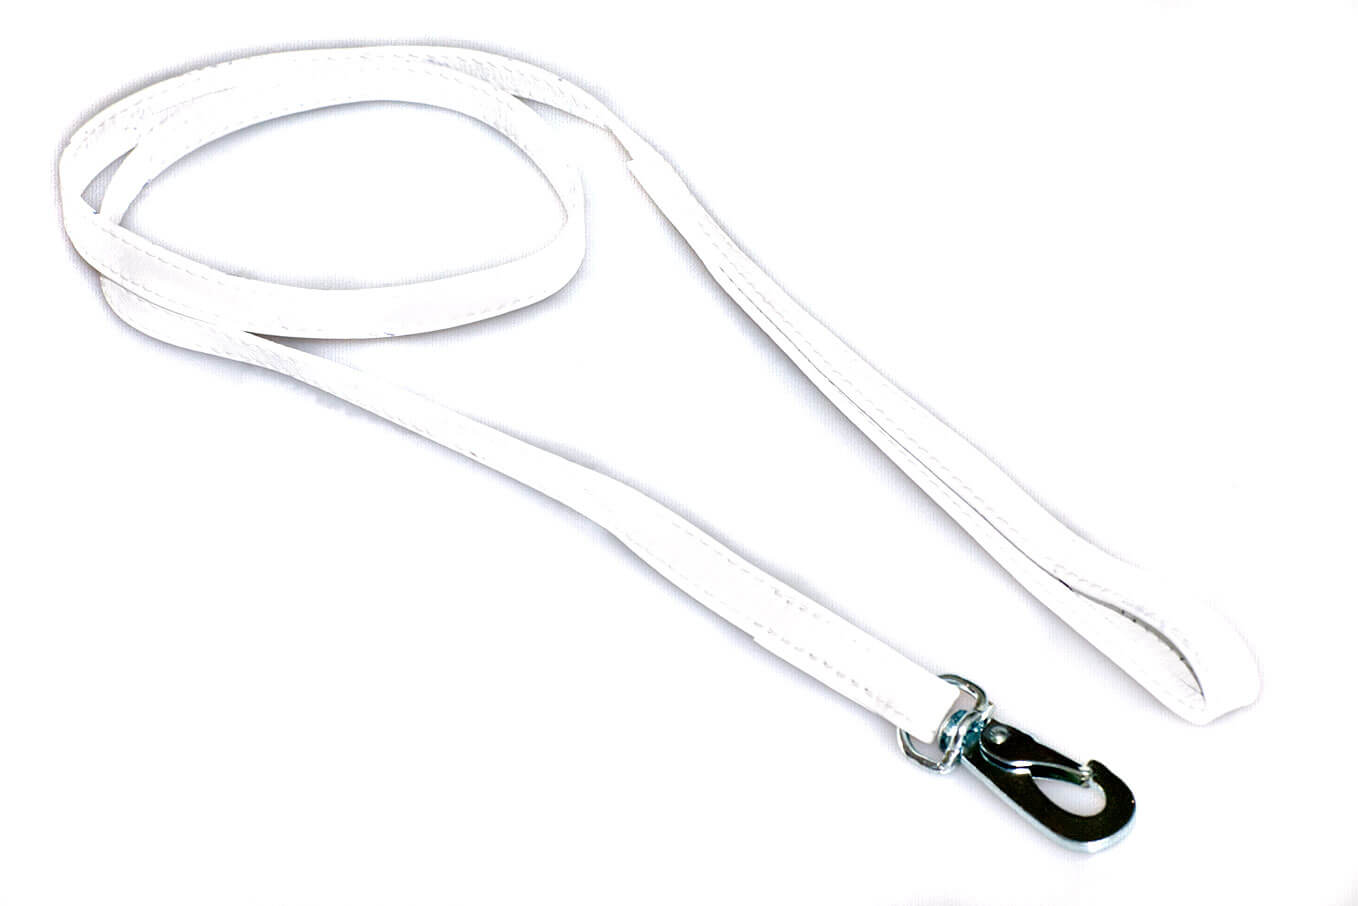 White nappa leather stitched dog show lead